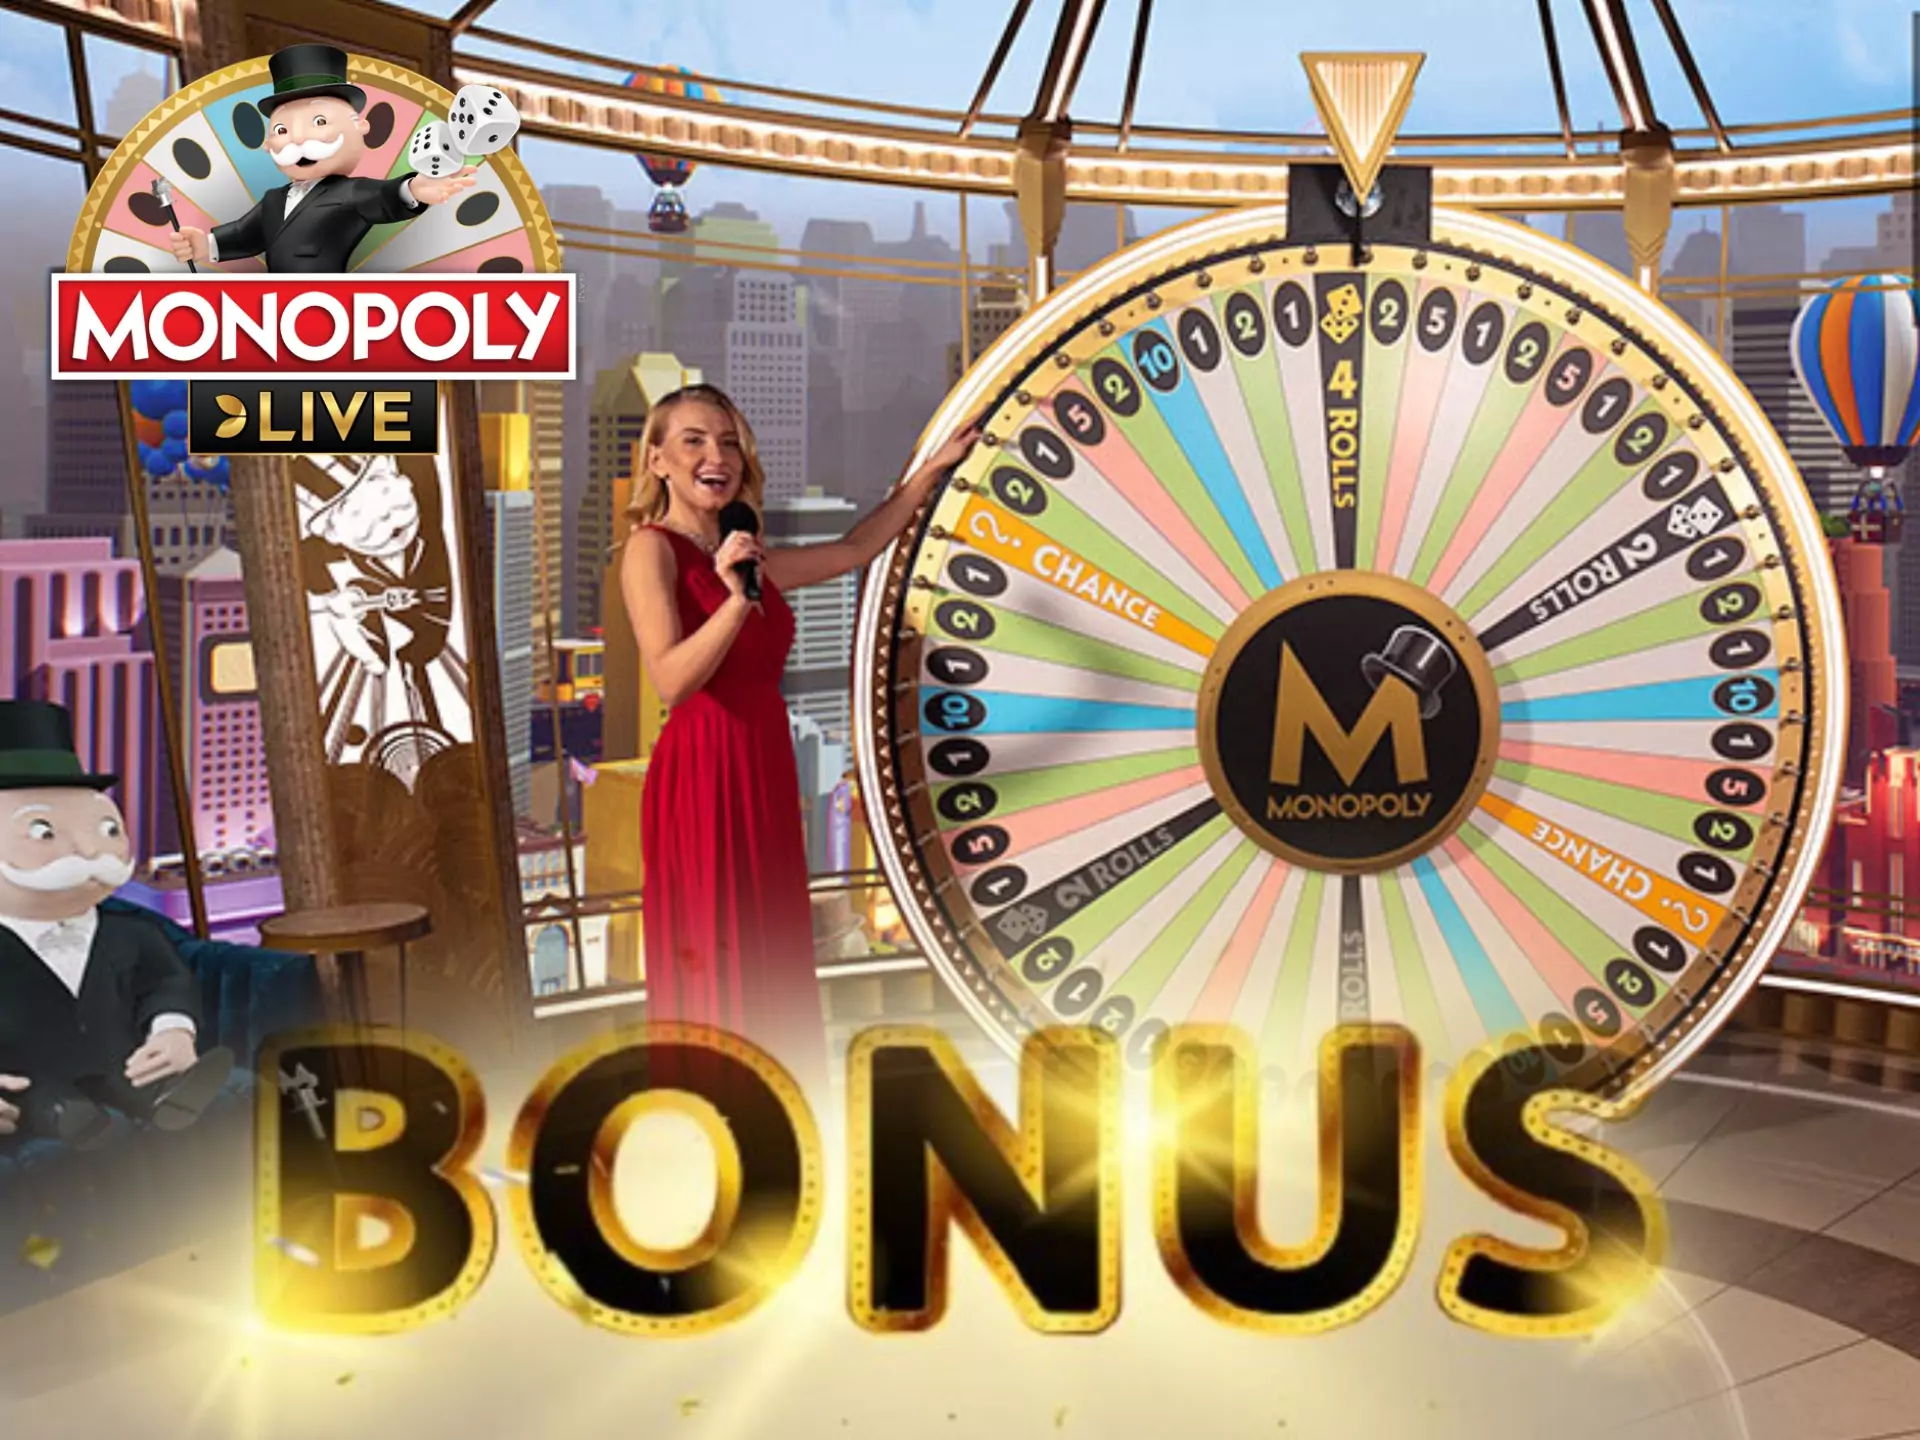 Register at an online casino and get your bonus on playing live monpoly.